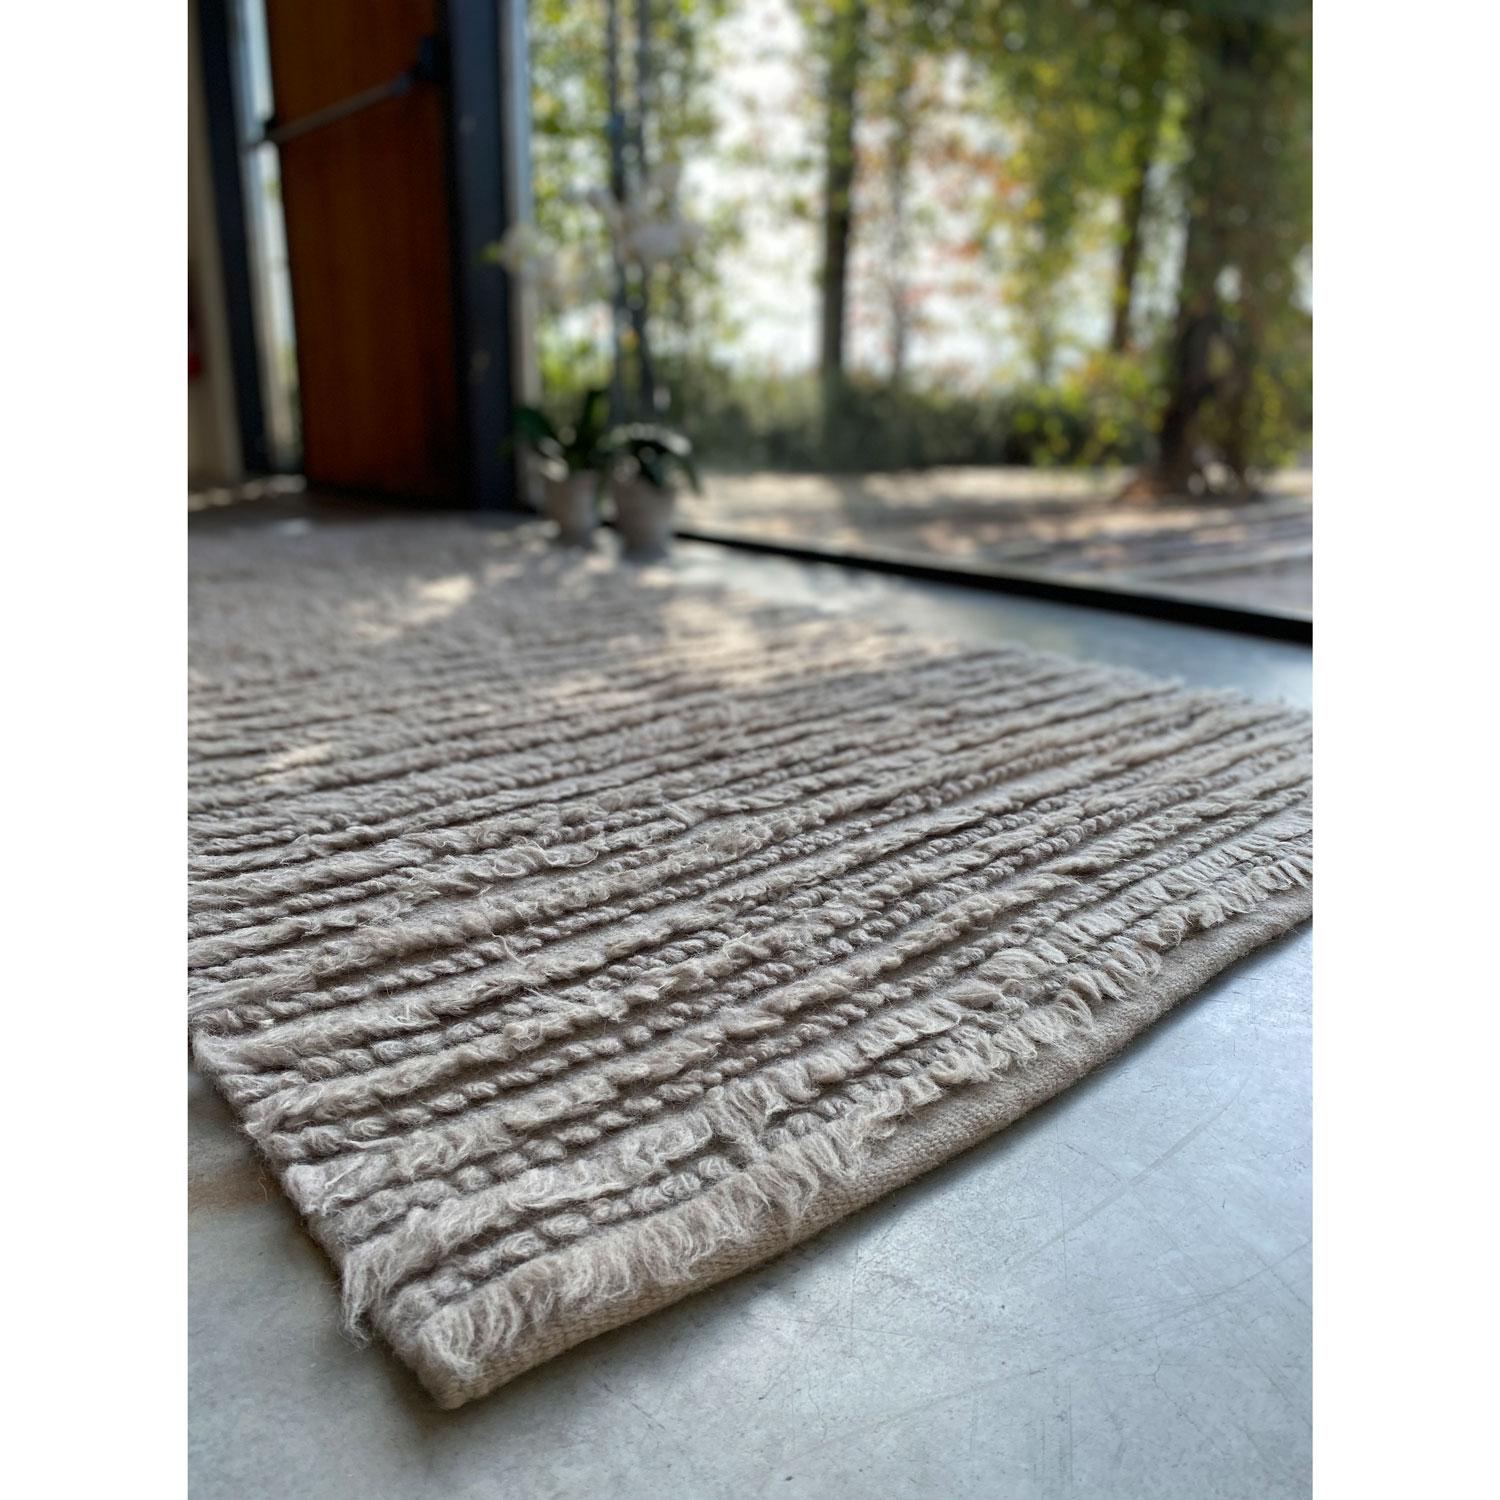 “Kids” is an ultra-natural contemporary rug designed by Deanna Comellini for G.T.DESIGN, Italian design company pioneer in the field of contemporary rugs since 1977.

The weft of the “Kids” collection recreates the fleece of sheep and kids, whose